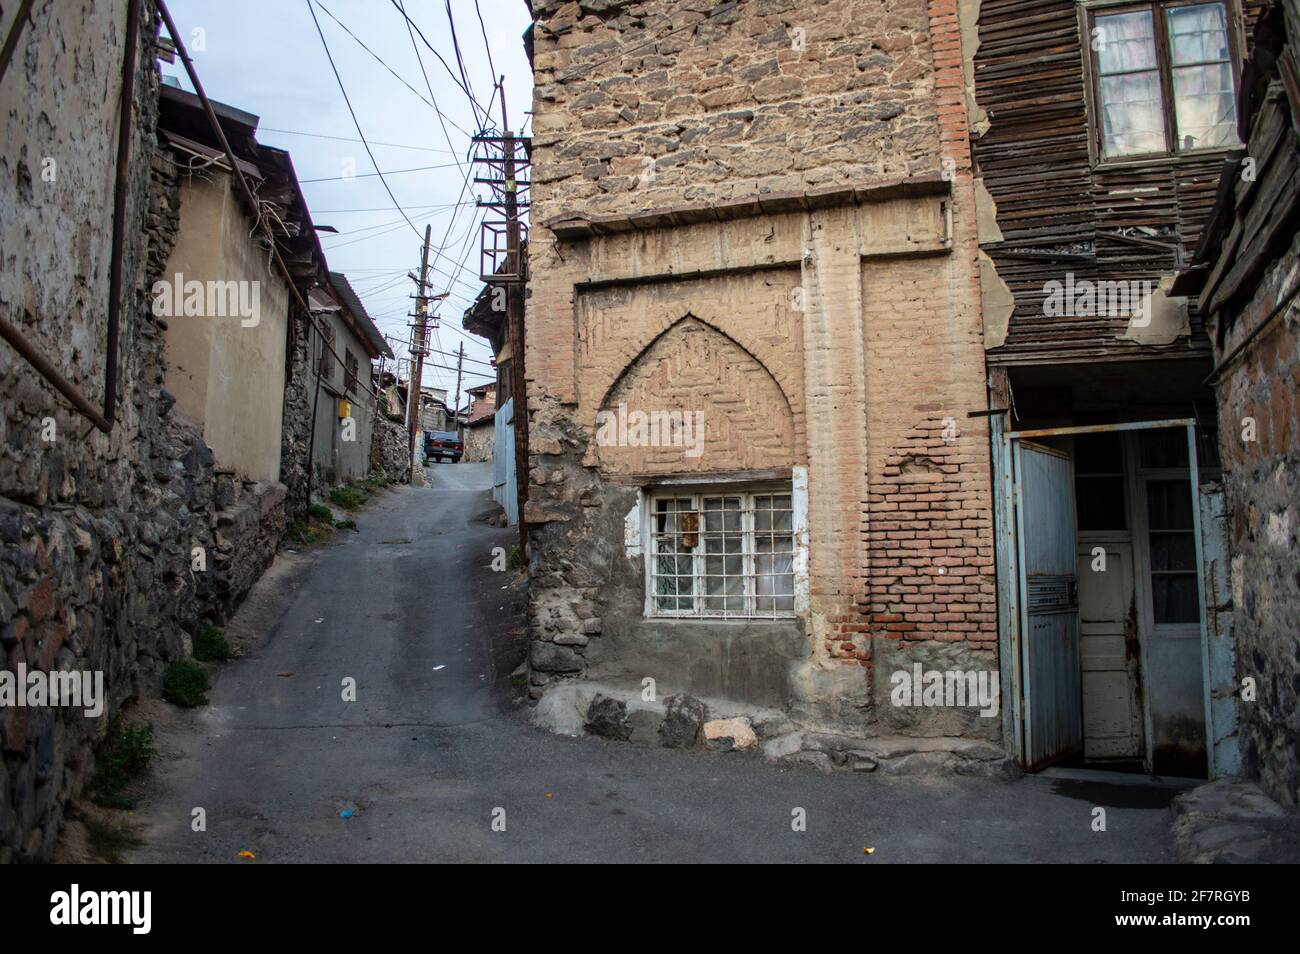 Old house in Kond district, a historical area in the city of Yerevan, Armenia Stock Photo